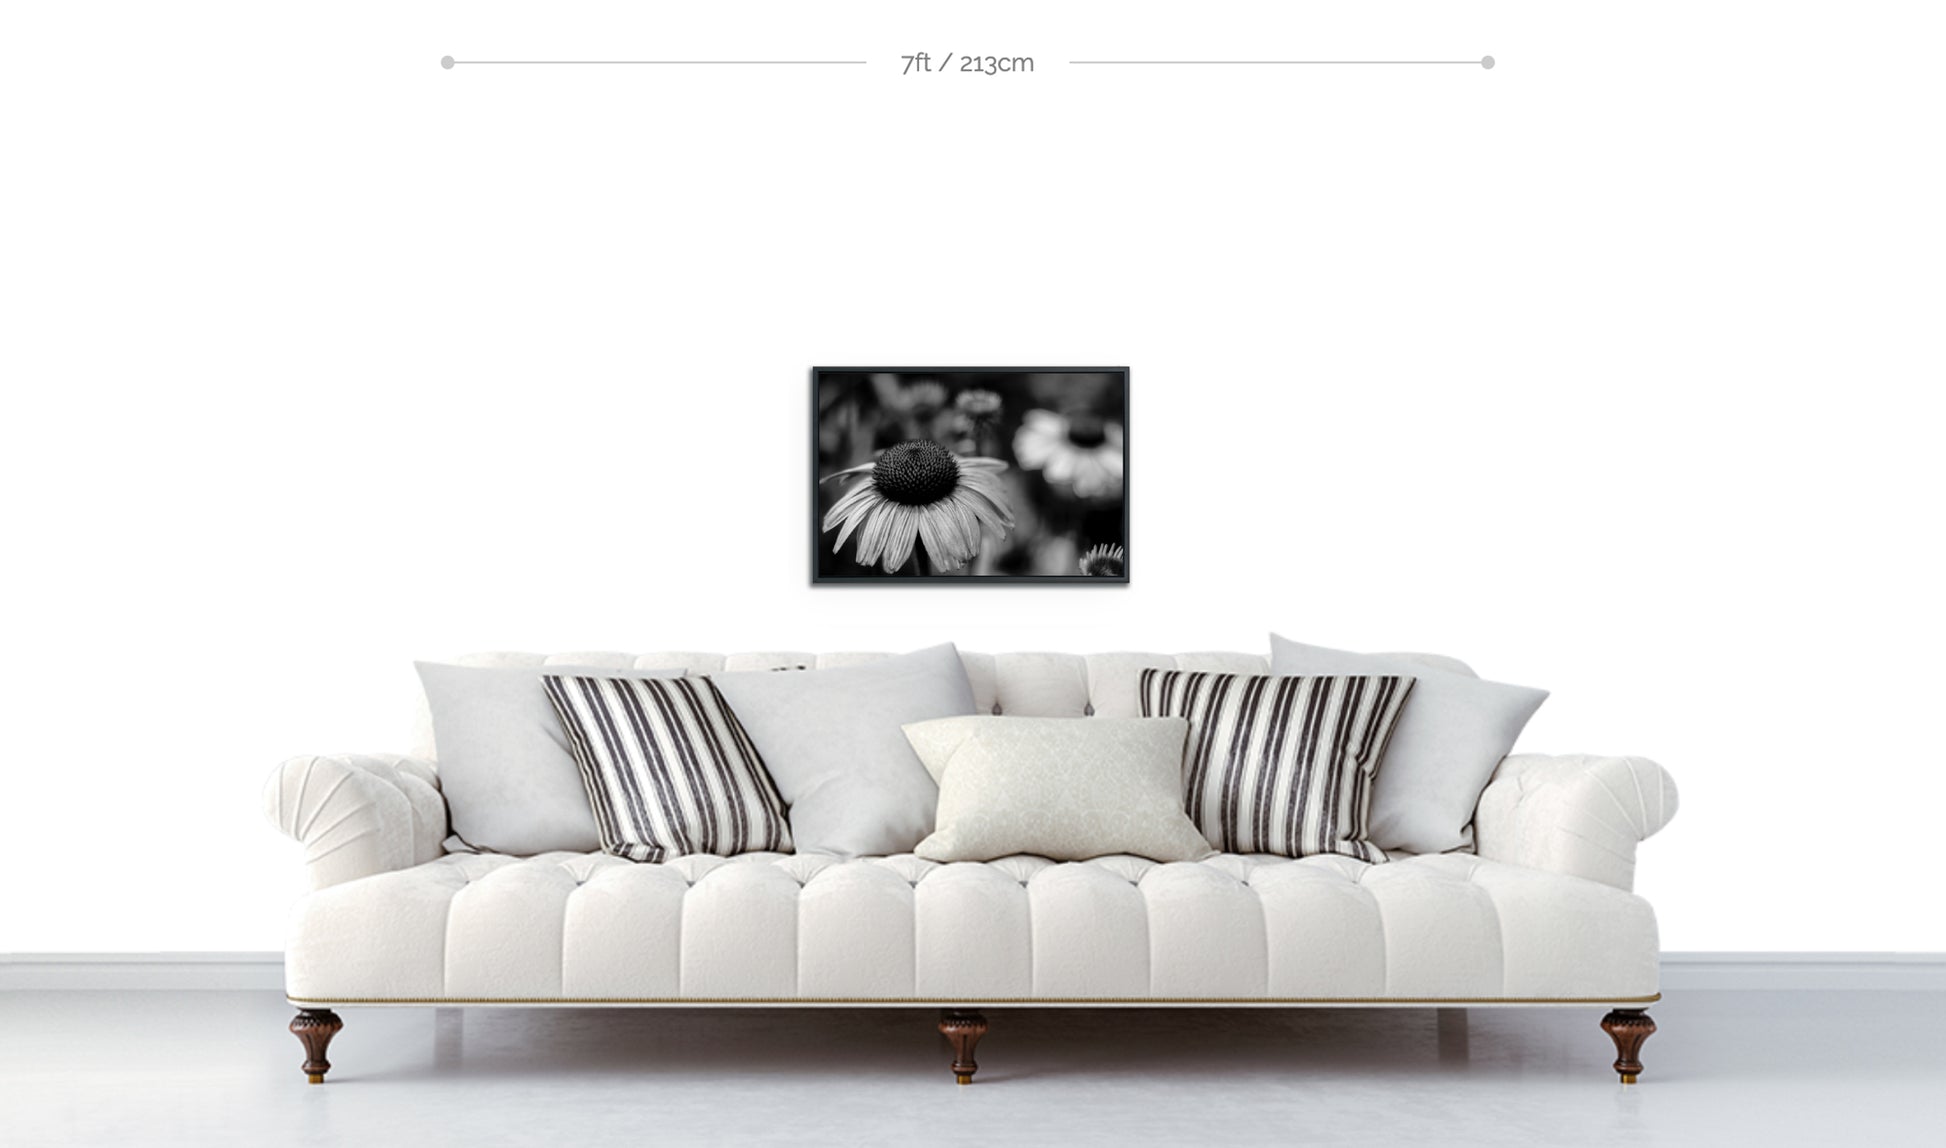 Flowers art print framed black and white photograph echinacea cone flower in focus in foreground hanging above sofa